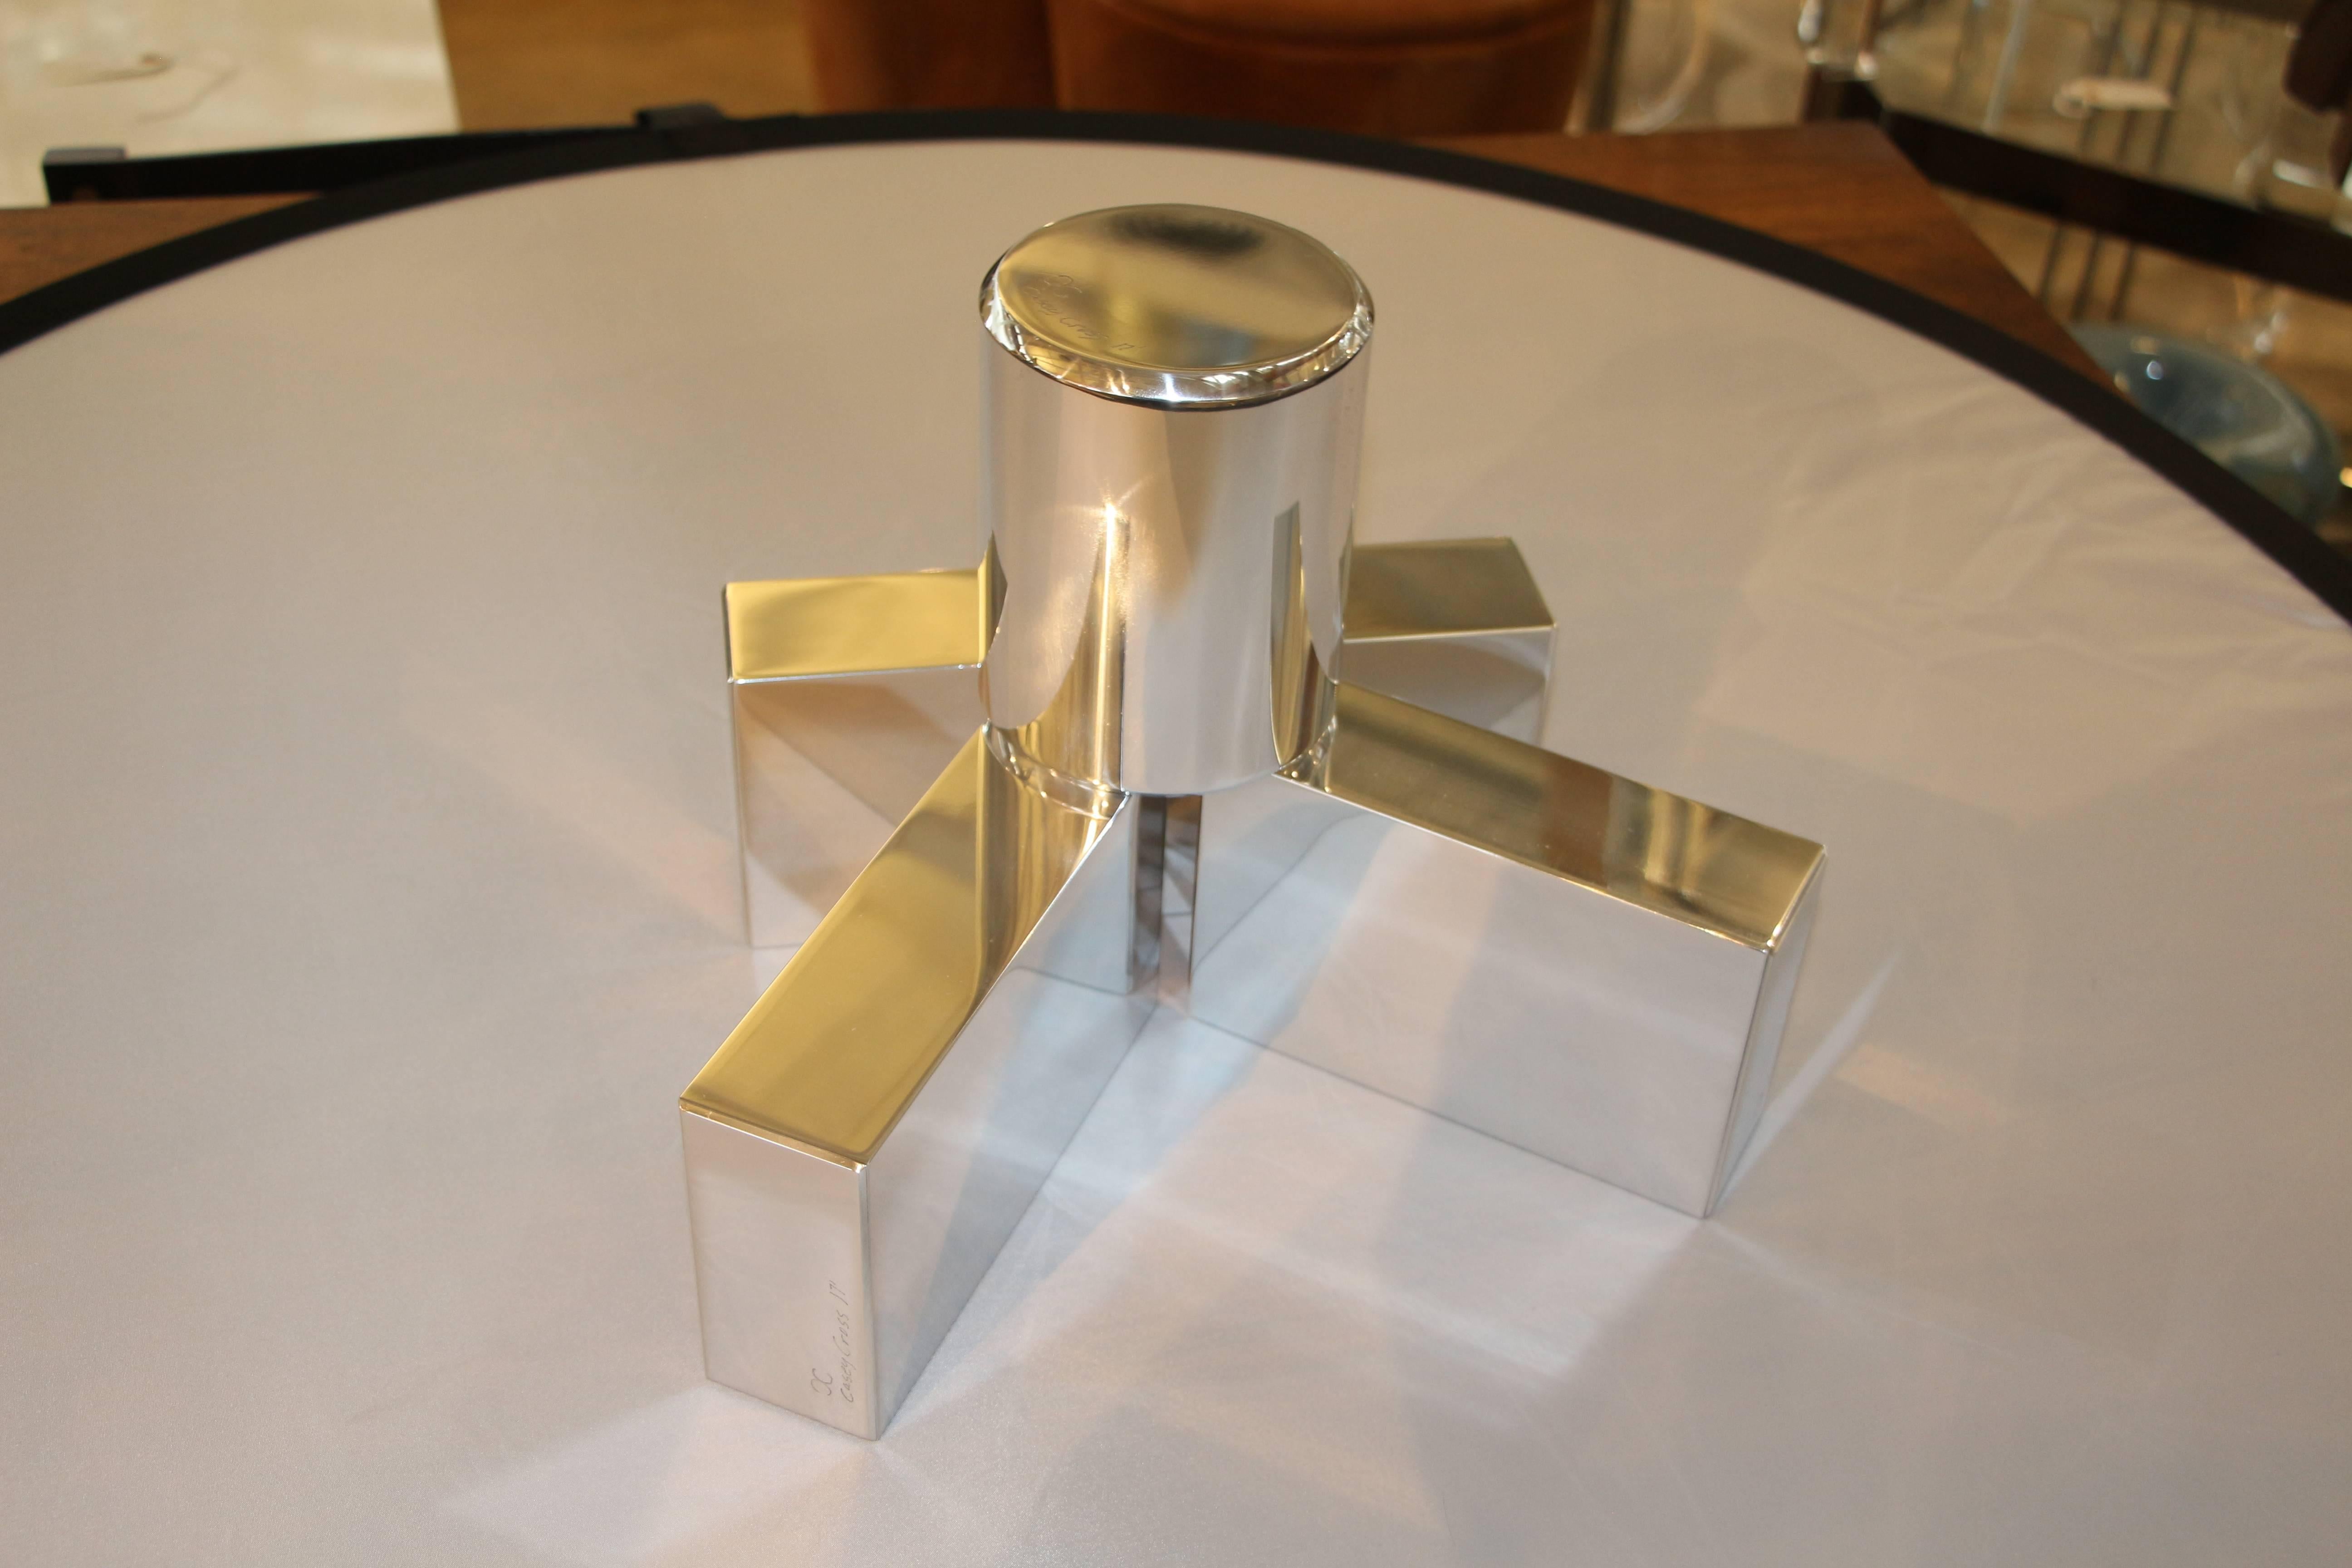 Our gallery is proud to represent an new talented artist Casey Cross who now resides in Palm Springs, CA. His work is unique and quite unusual. These geometric shapes can be arranged in any way. They are polished aluminum shapes. Each piece has been